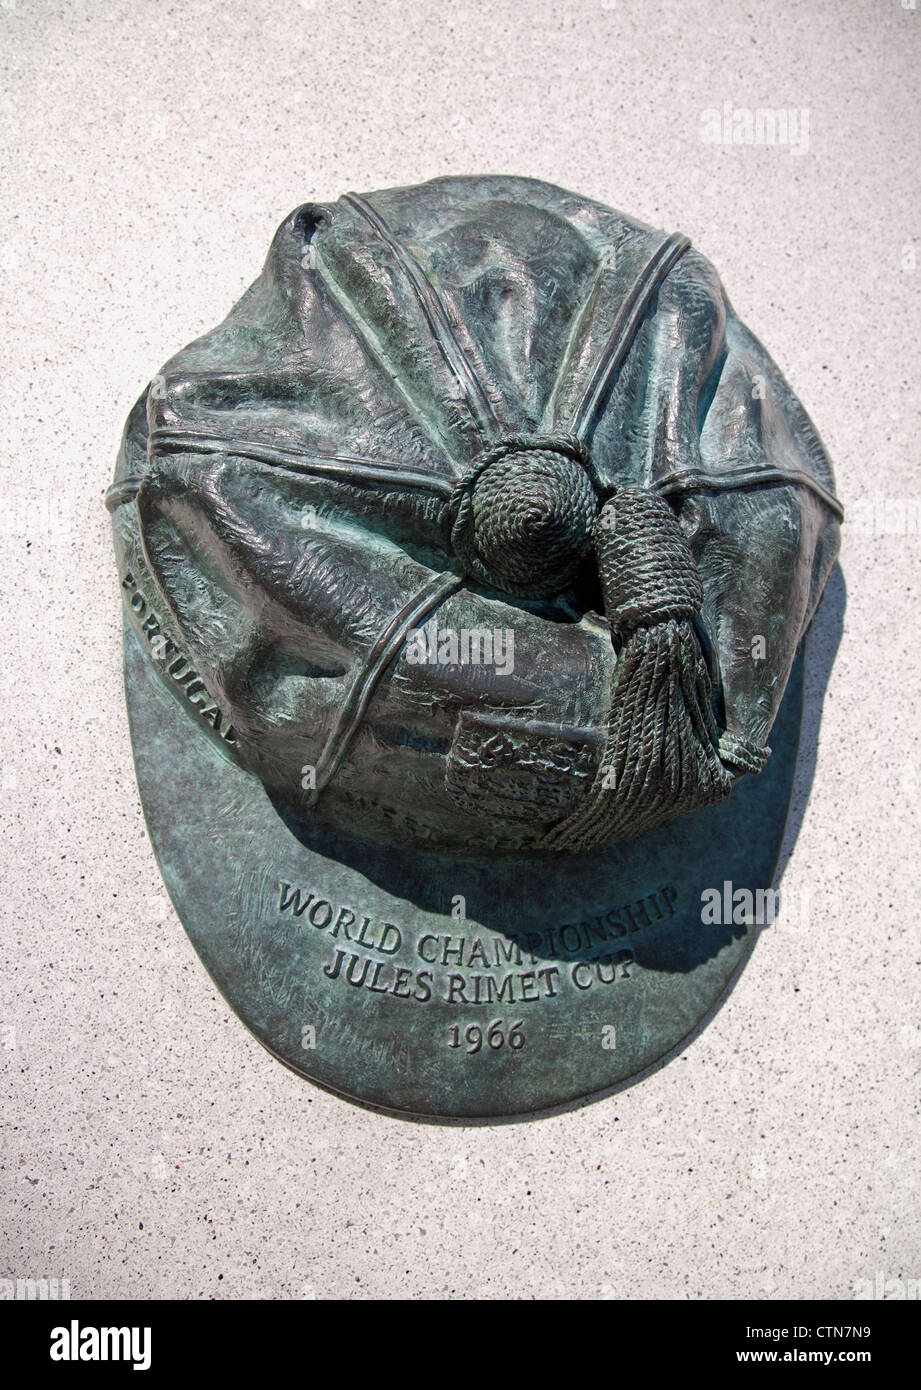 'World Championship, Jules Rimet Cup 1966' hat sculpture on the side of the Bobby Moore statue beneath Wembley Stadium Arch. Stock Photo